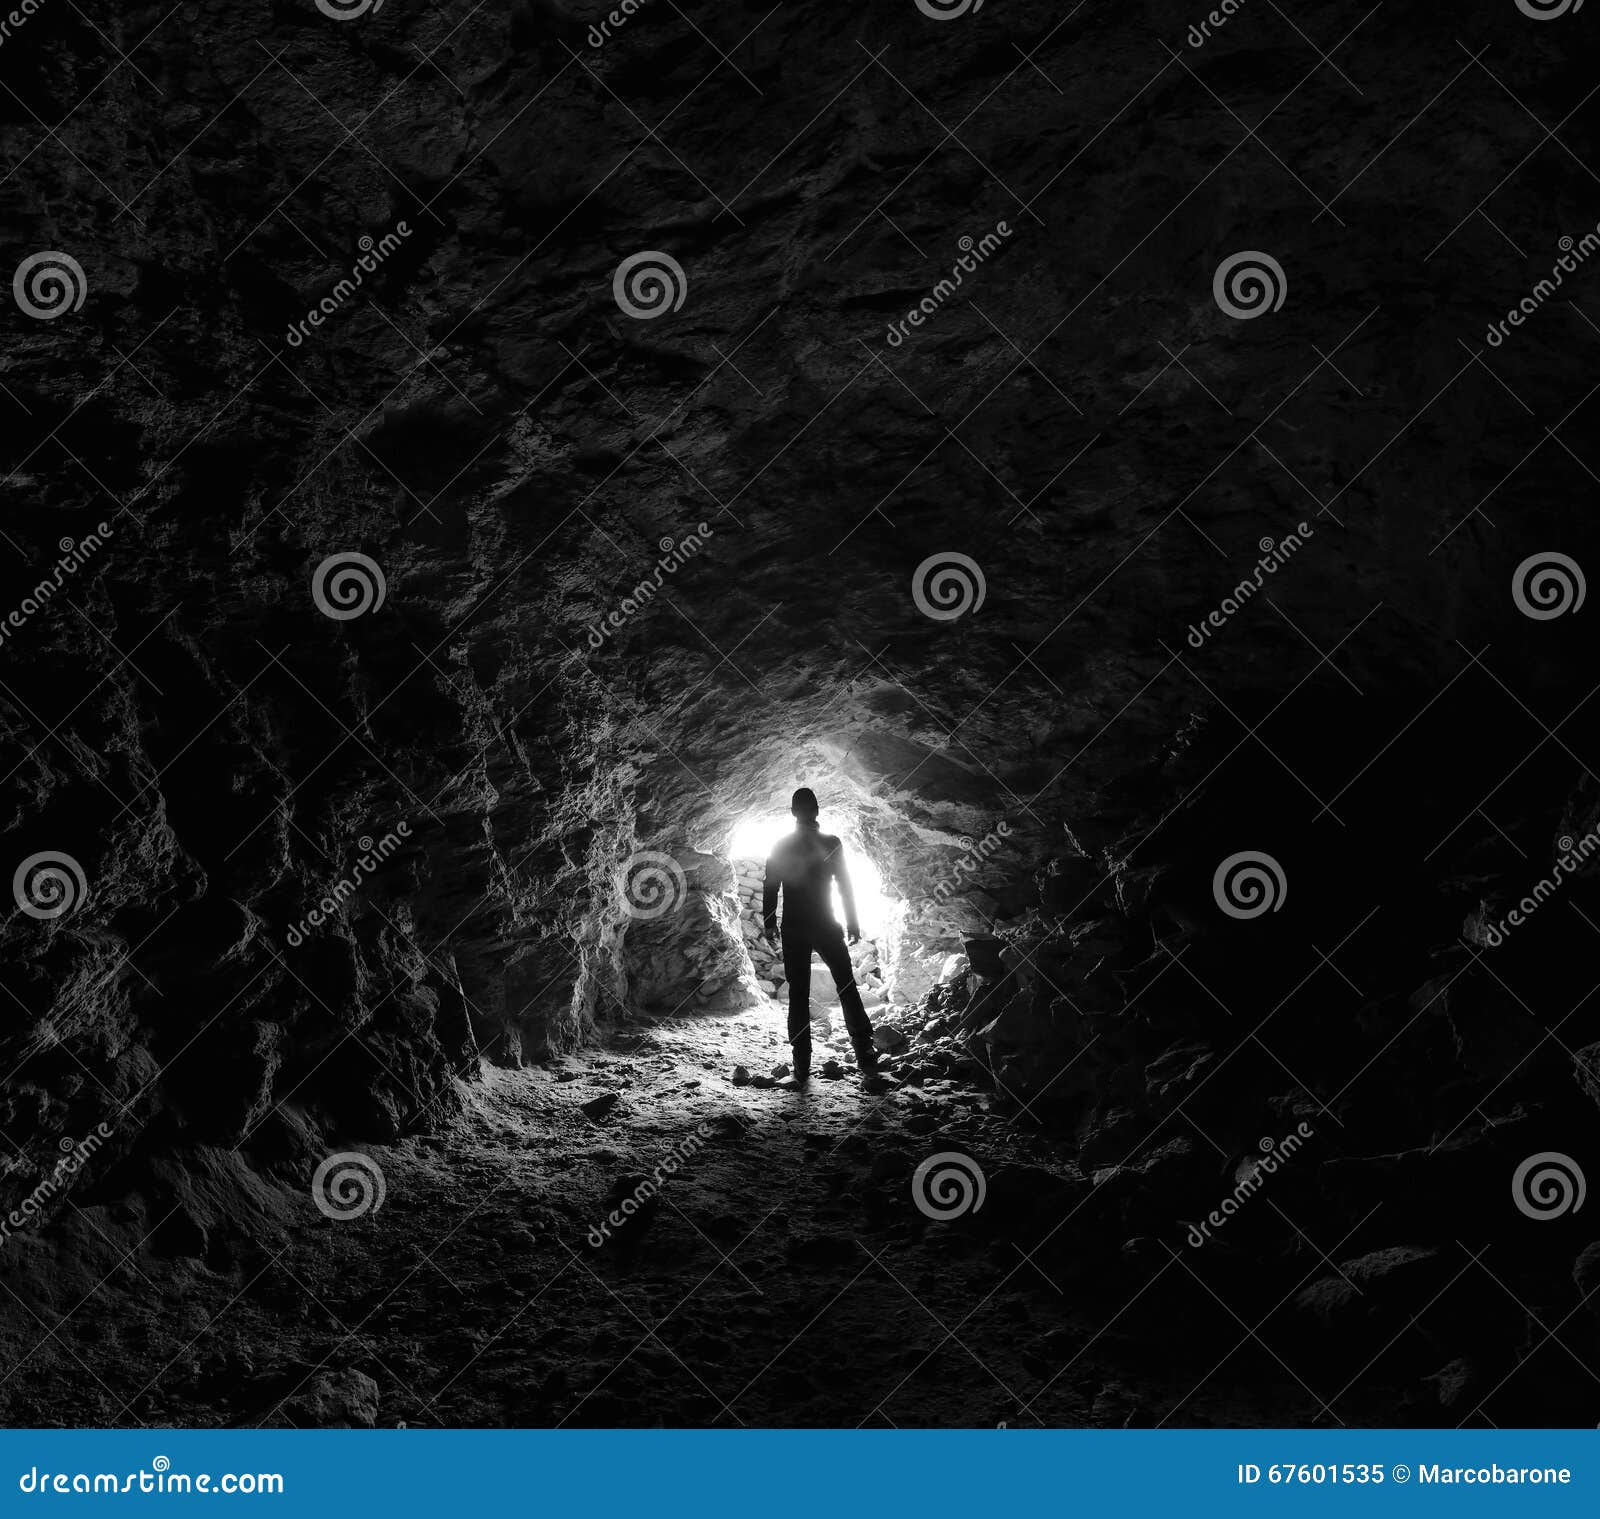 Watch out of the tunnel stock image. Image of cave, explorer - 67601535